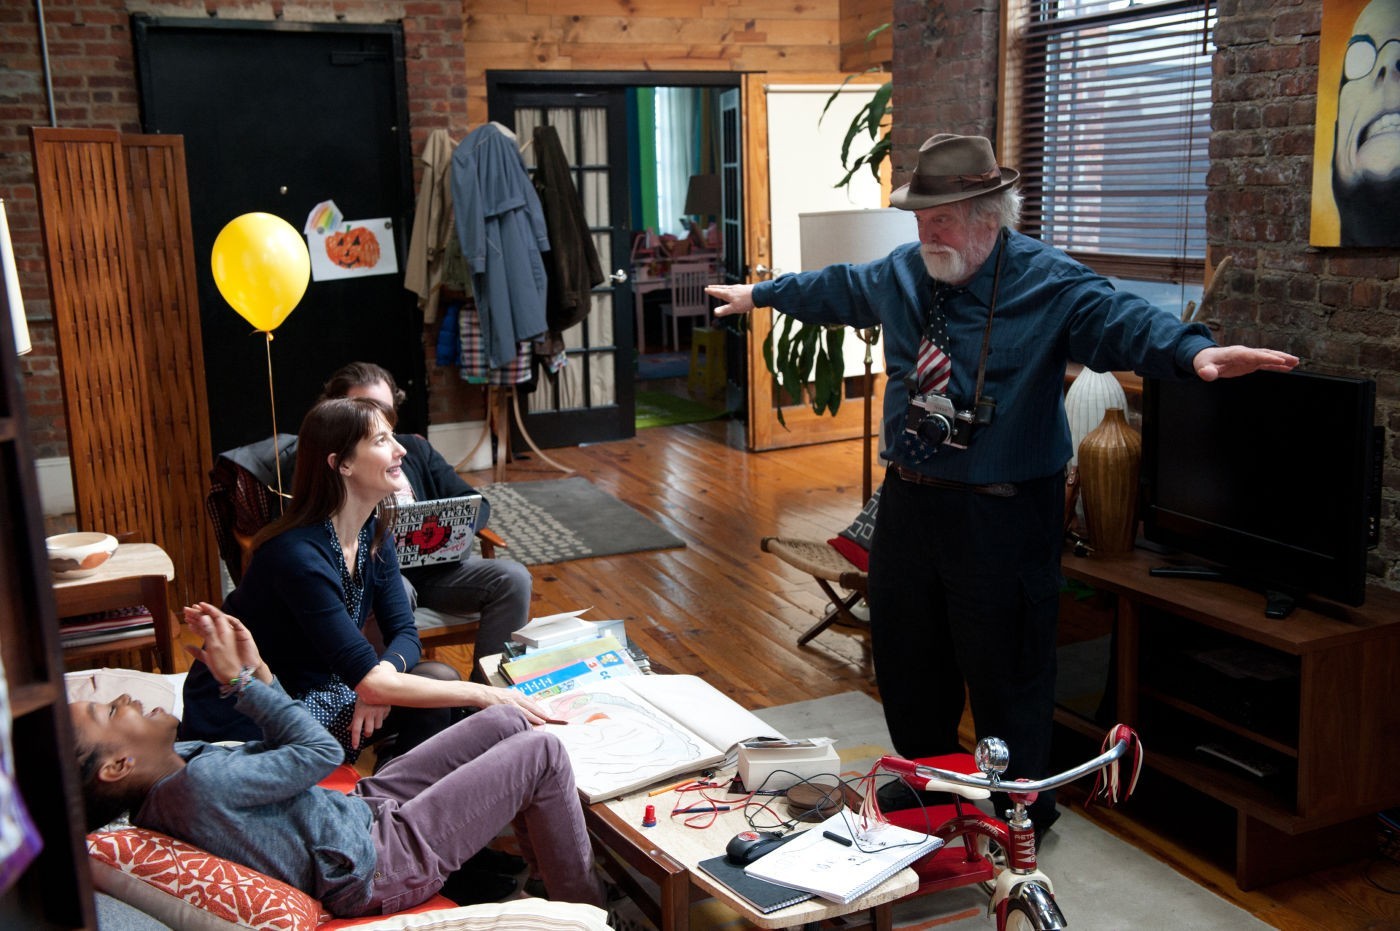 A scene from Magnolia Pictures' 2 Days in New York (2012)